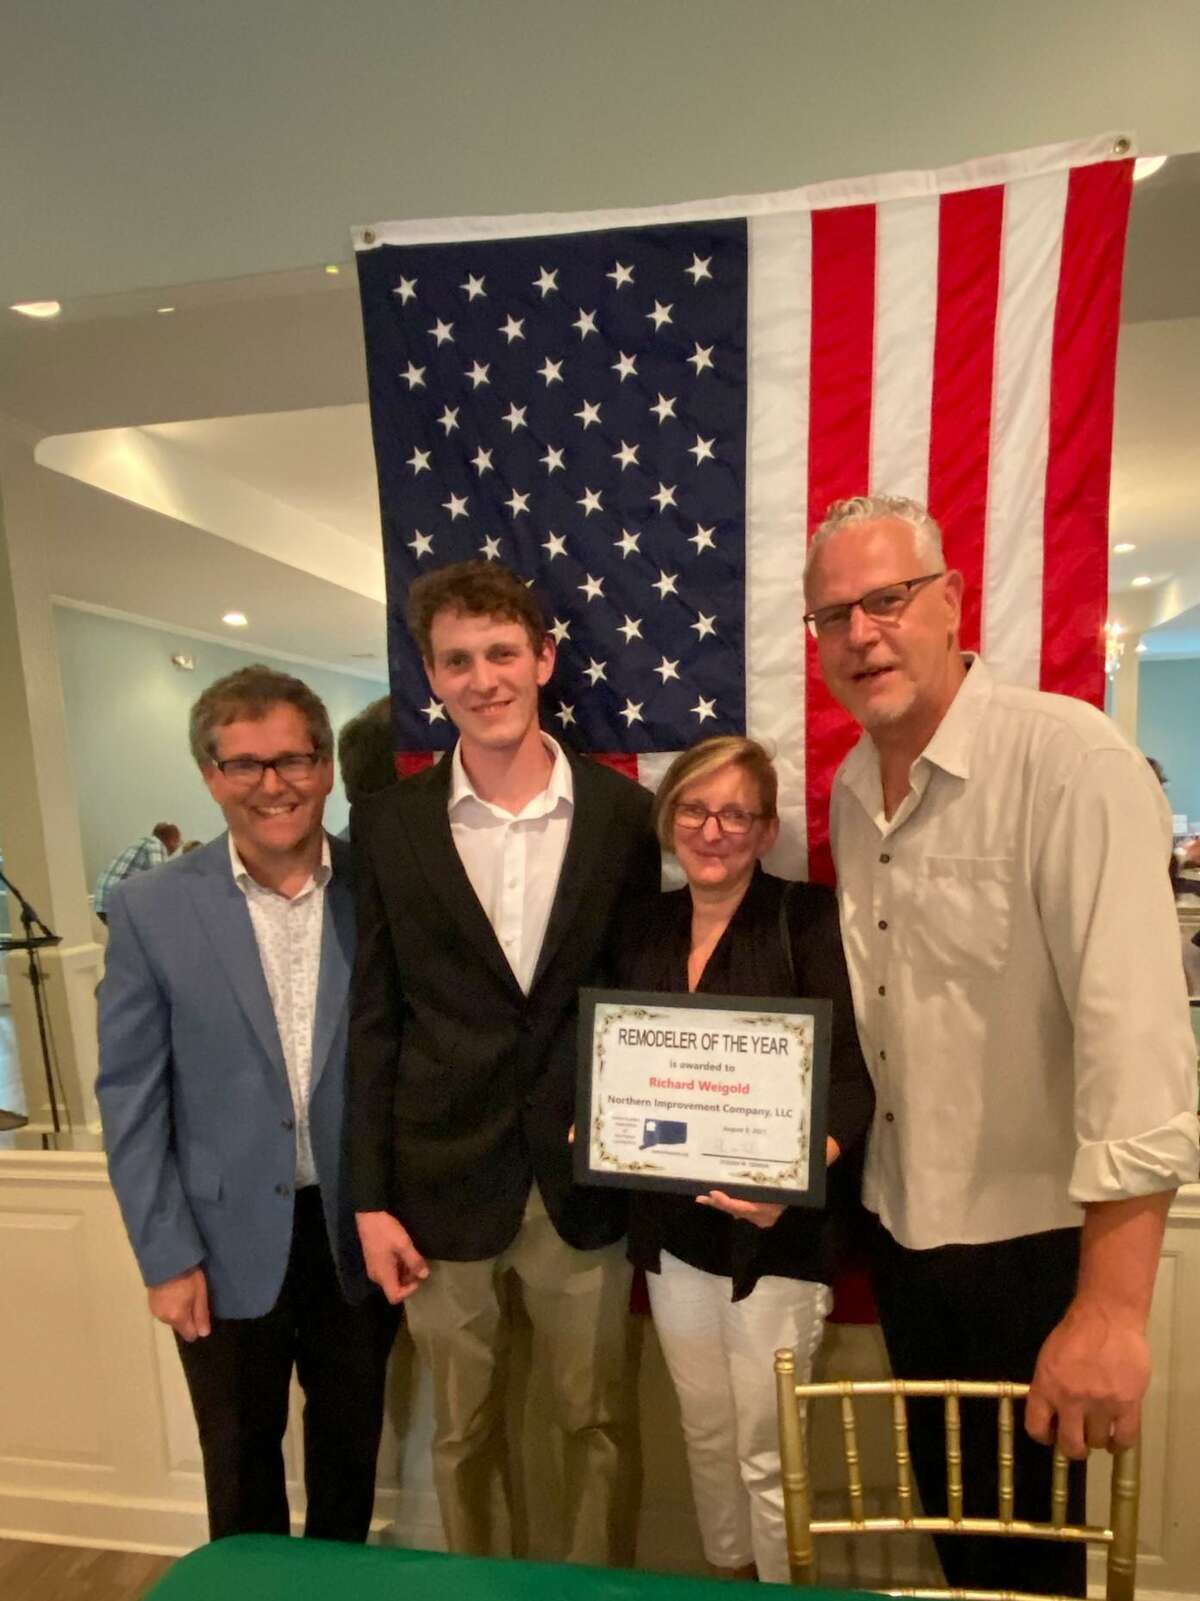 The Home Builder Association of Northwest CT joined the Litchfield County Chapter of the Greater Hartford Association of Realtors to honor Remodeler of the Year Northern Improvement Company of Torrington. From left are Steve Temkin and owners Mason, Cara and Richard Weigold.